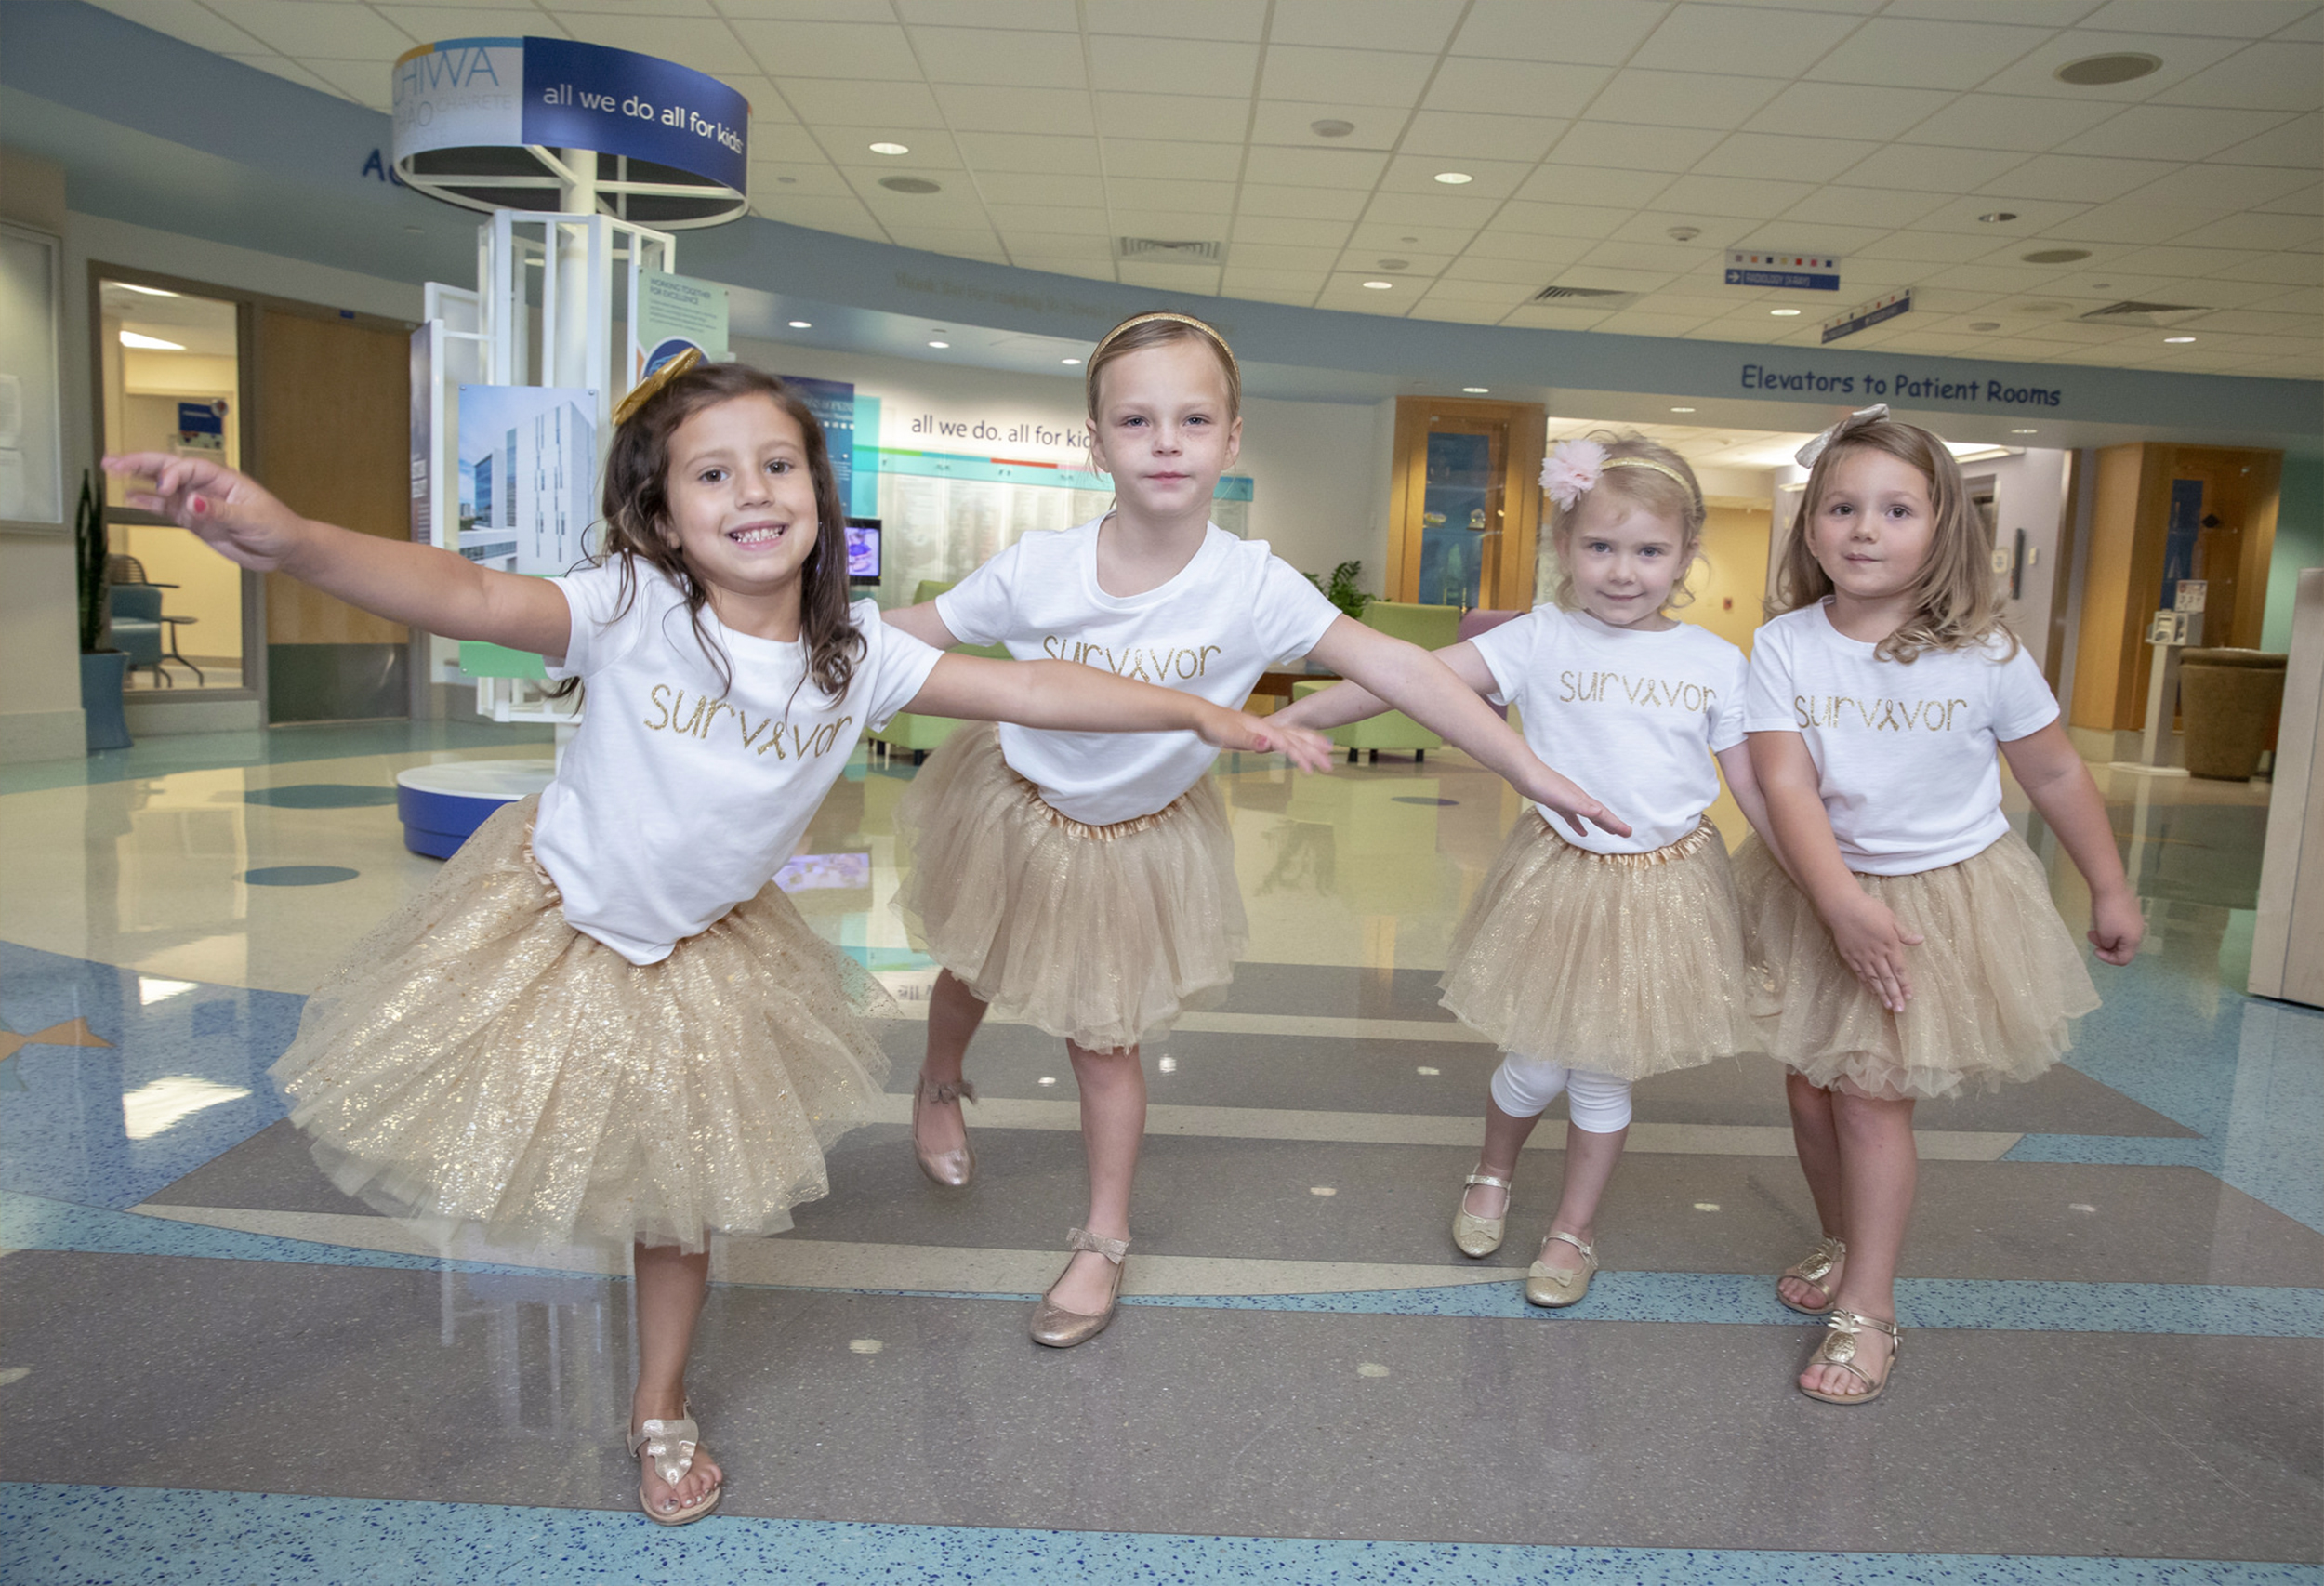 Four Girls Reunite After They Beat Cancer Together at the Same Hospital